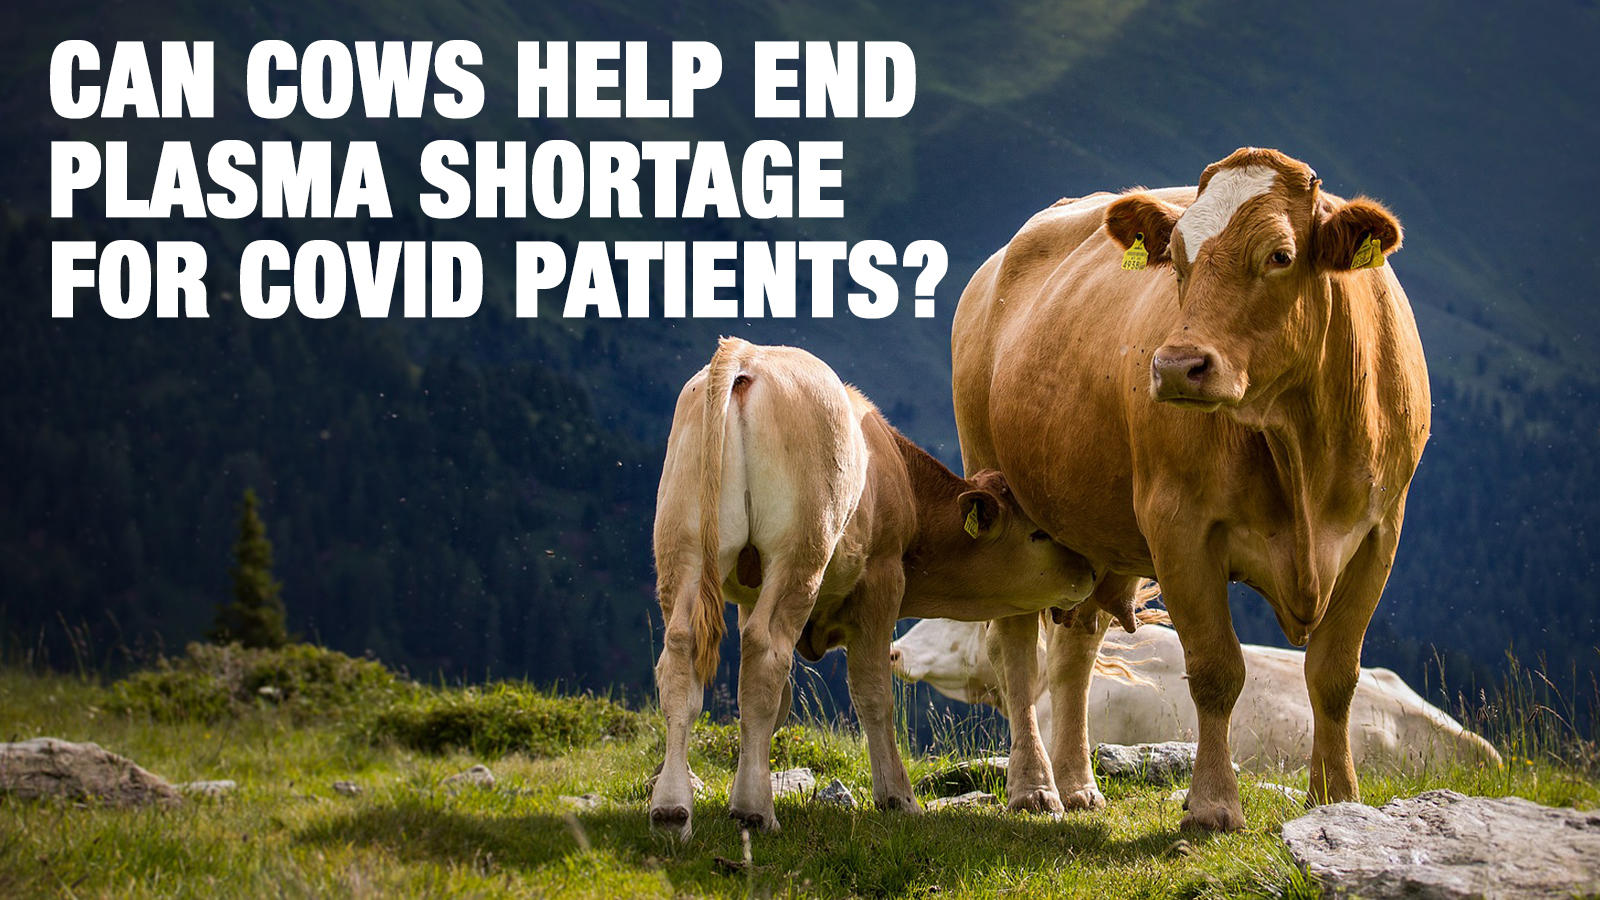 Can cows help end plasma shortage for Covid patients? Times of India